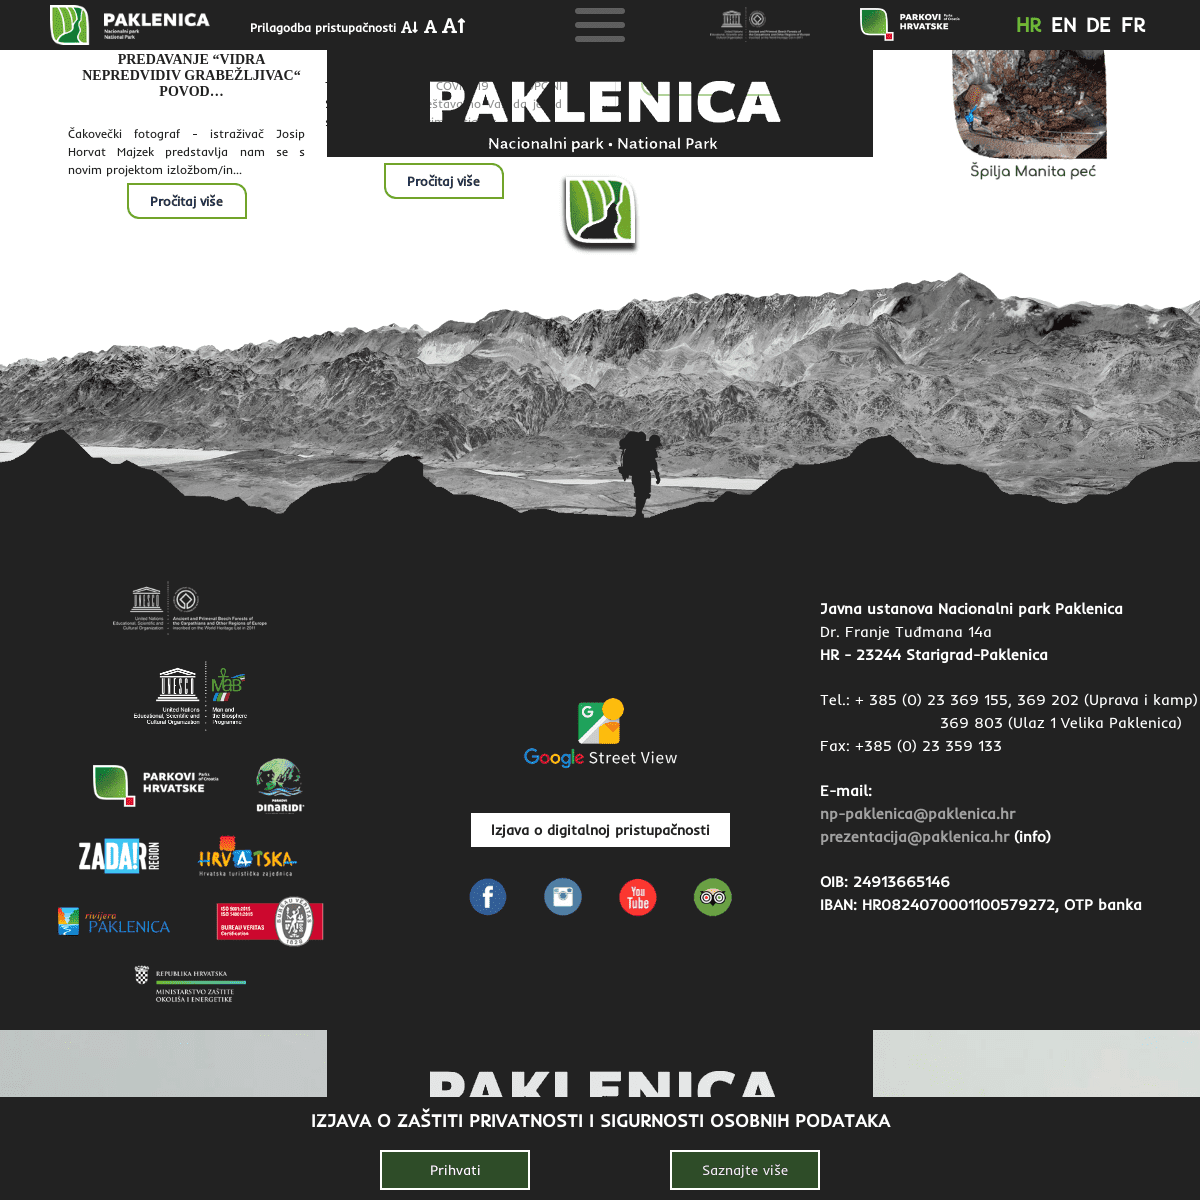 A complete backup of https://paklenica.hr